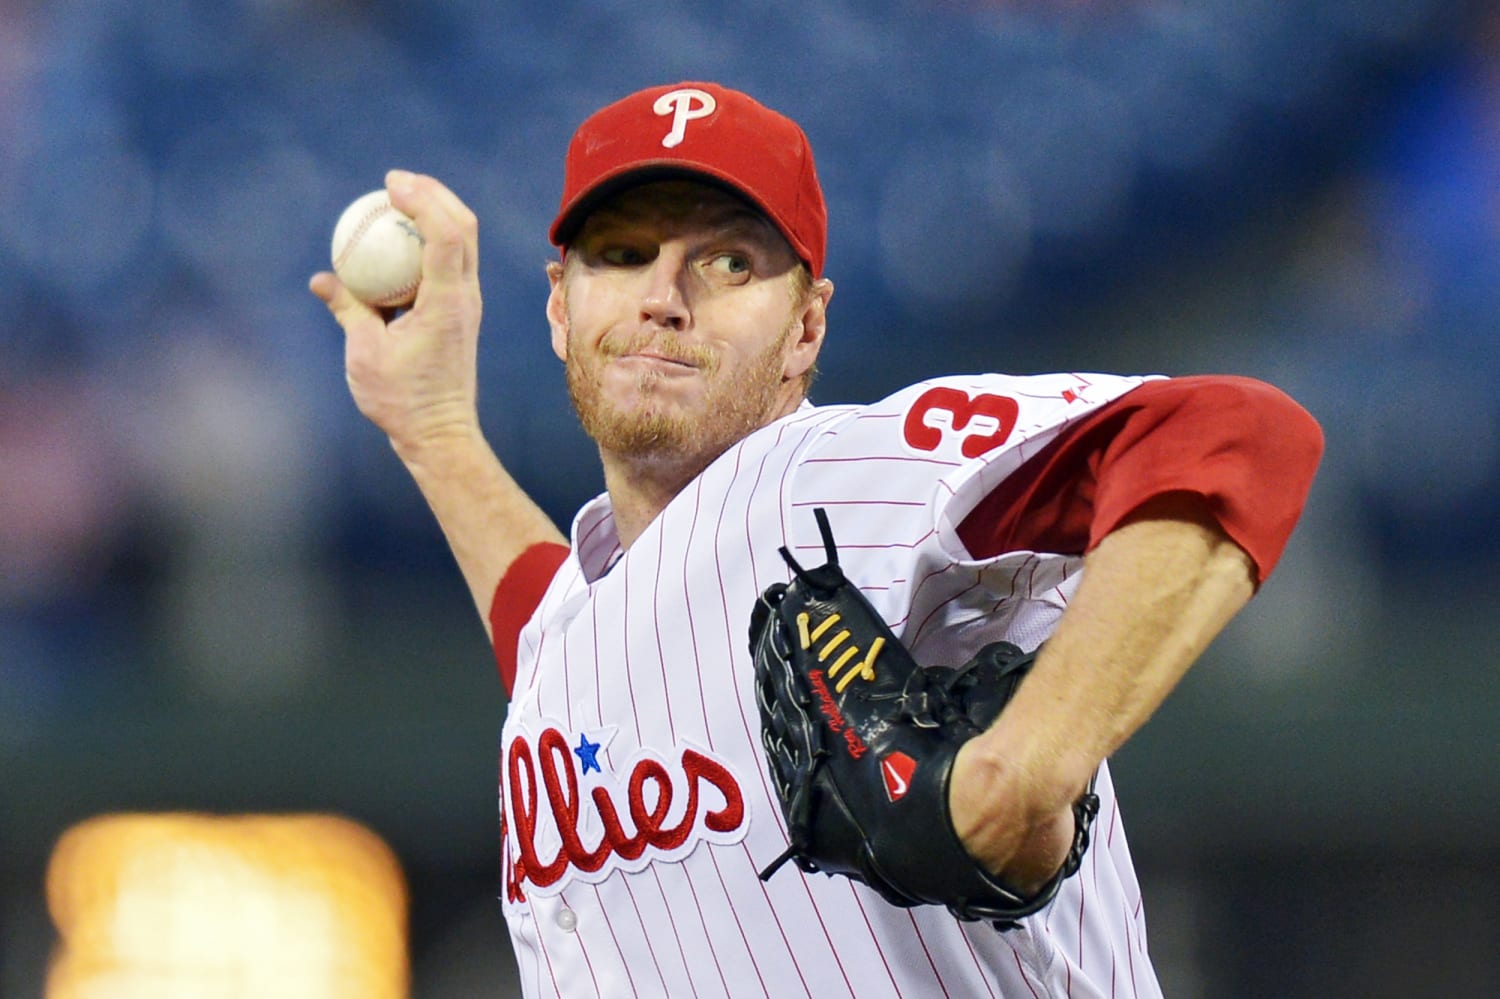 Phillies Great Roy Halladay is Elected to the Hall of Fame